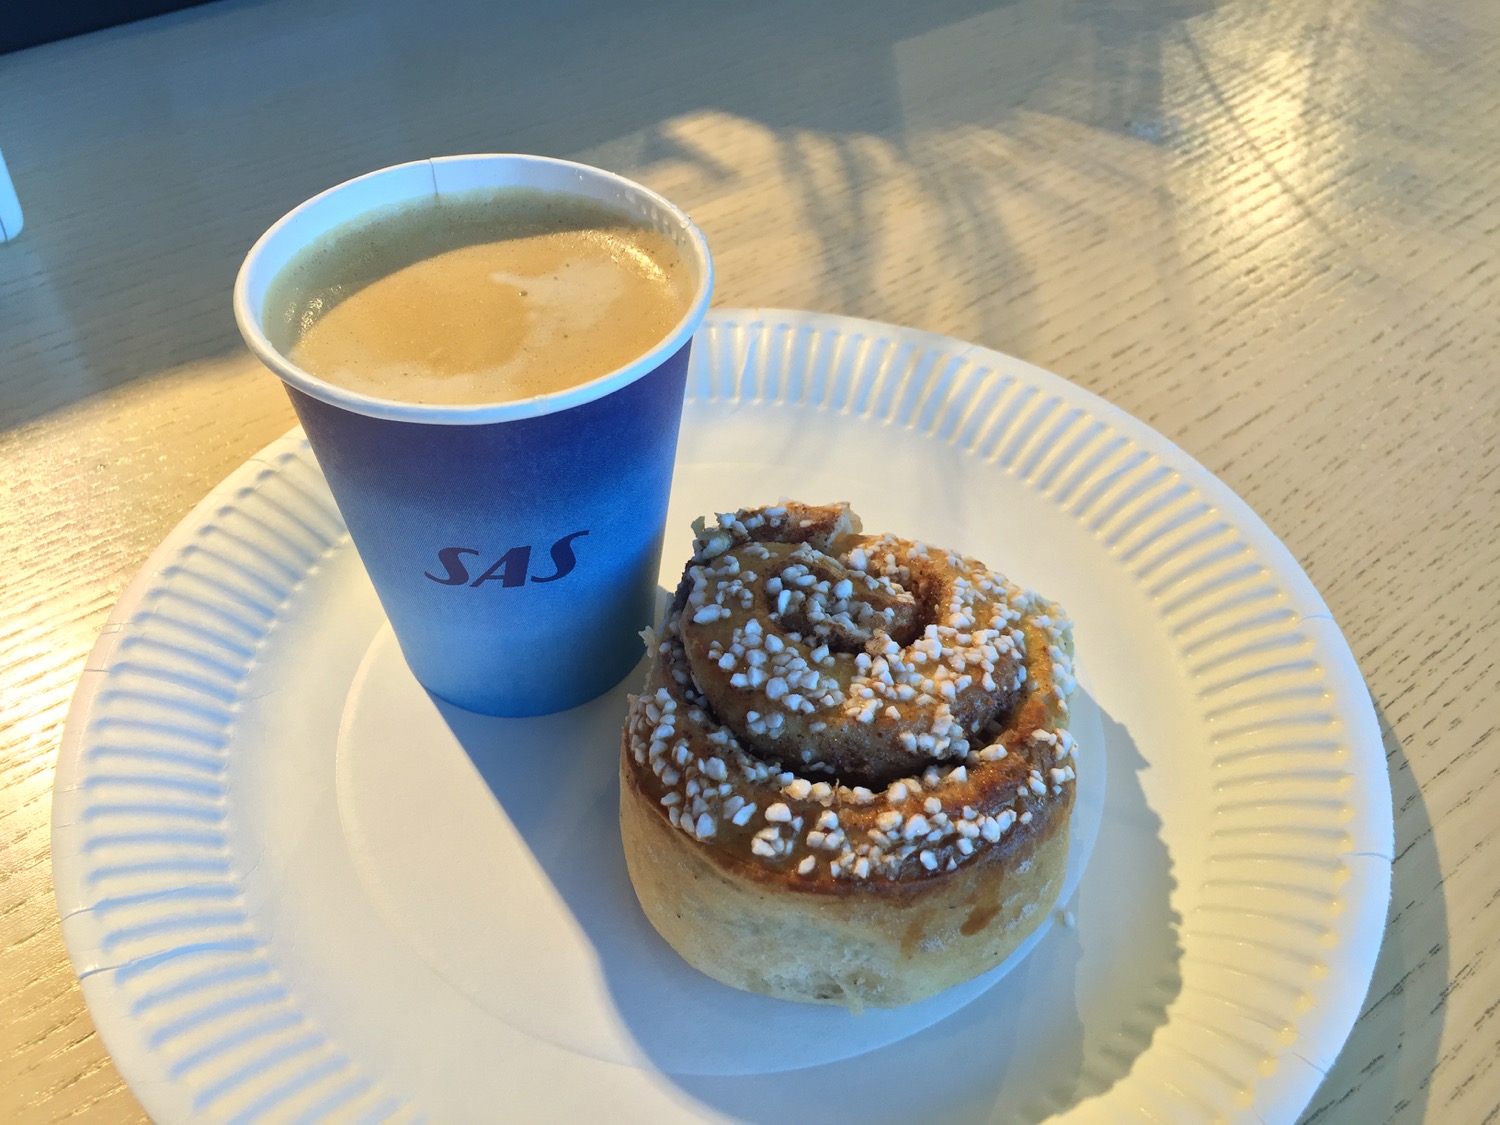 a cinnamon roll and a cup of coffee on a plate